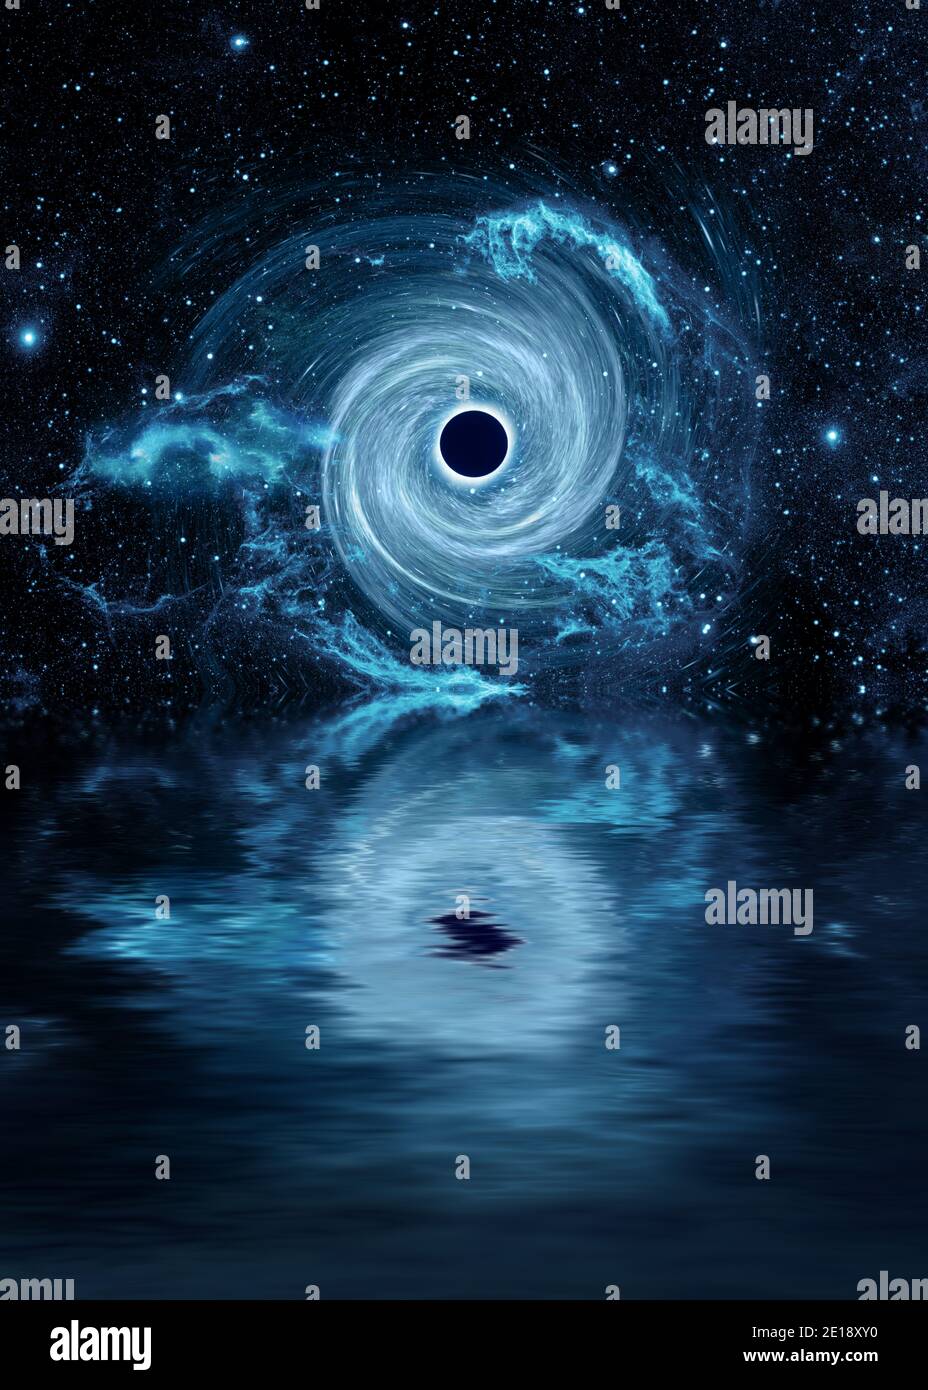 Black hole singularity and gravitational waves vortex concept with reflection Stock Photo